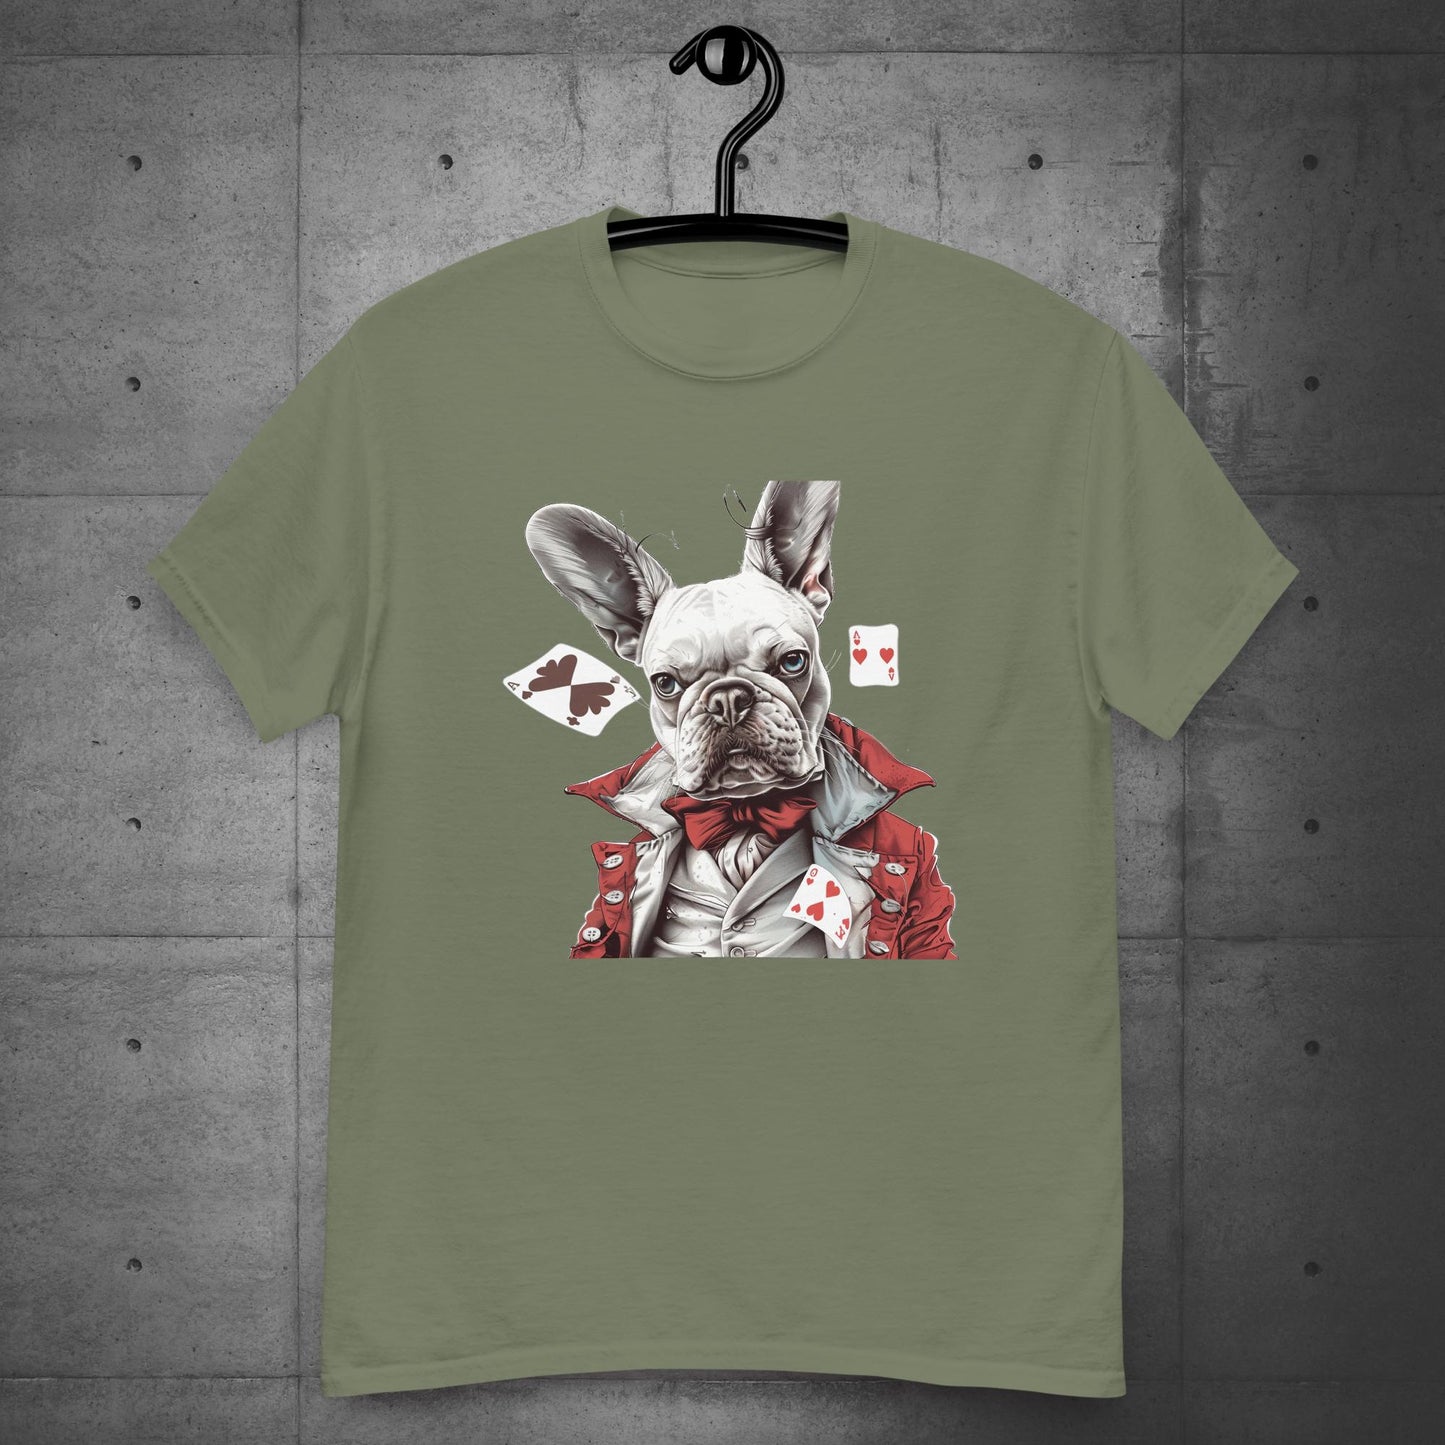 Frenchie "Player of the cards" - Unisex T-Shirt